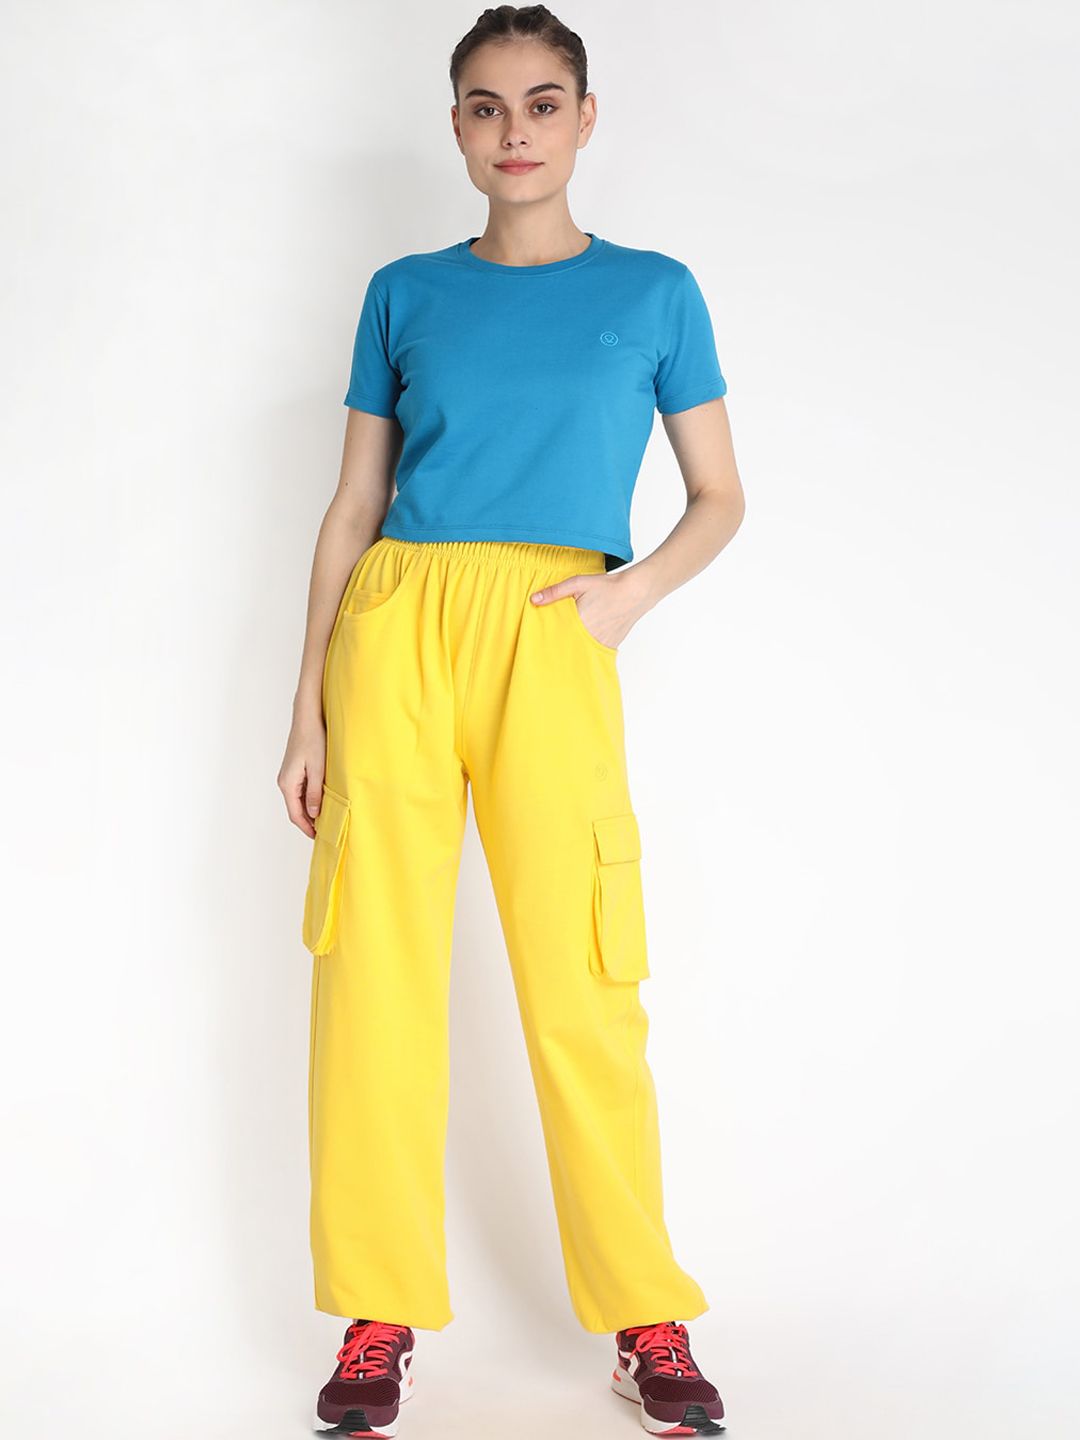 Chkokko Woman Blue & Yellow Solid Tracksuit Price in India